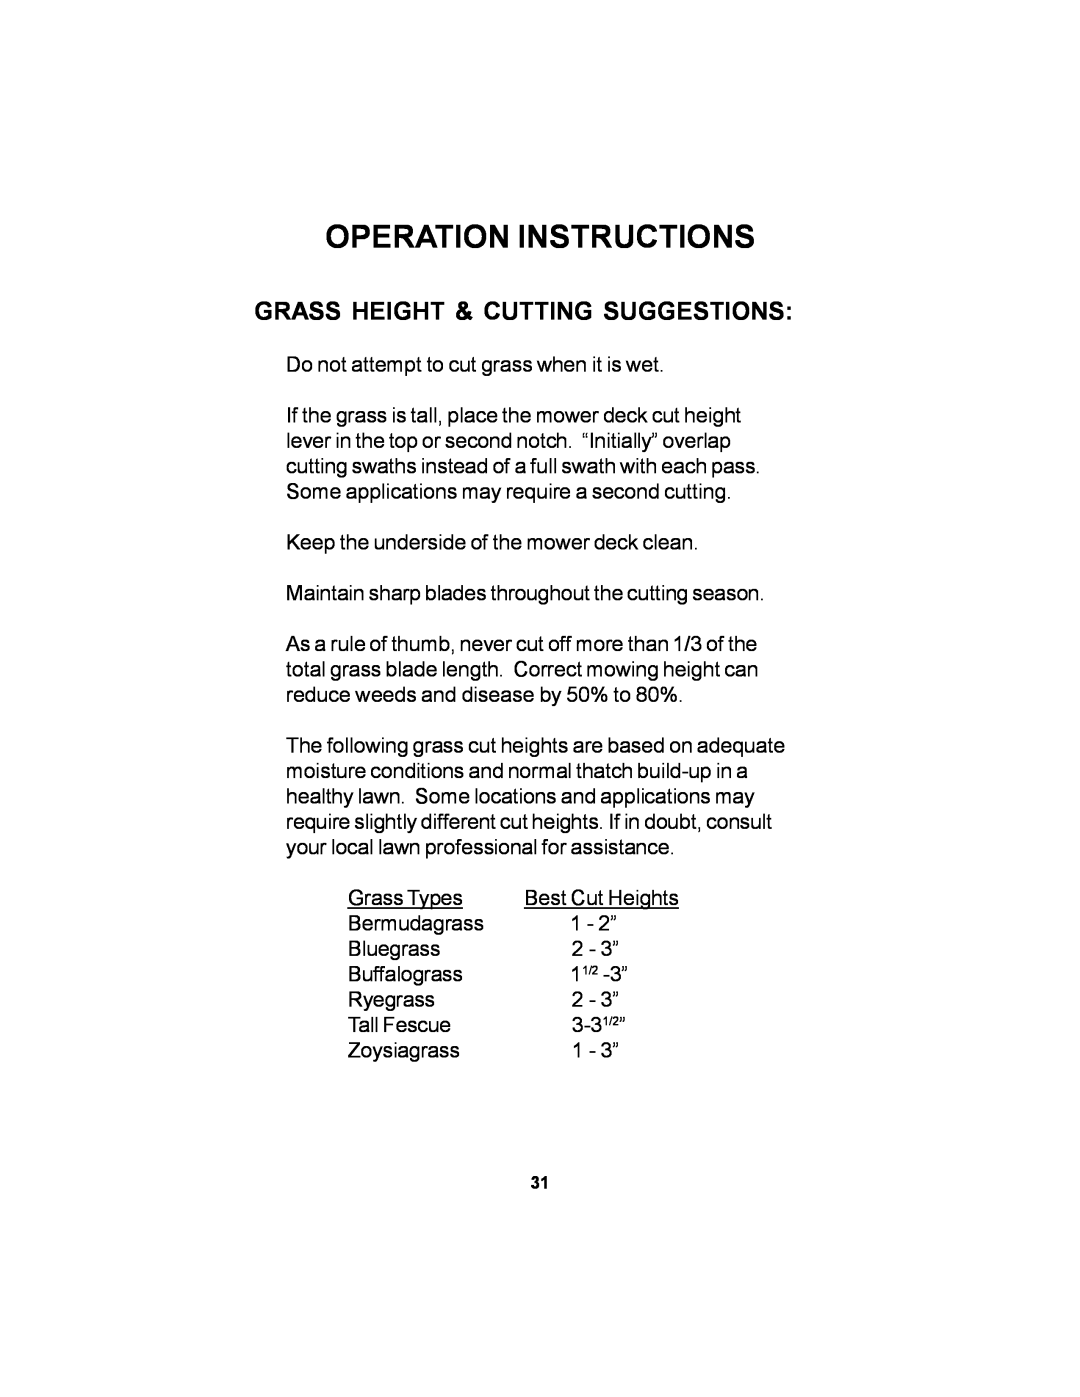 Dixon ELS 60 manual Grass Height & Cutting Suggestions, Operation Instructions 